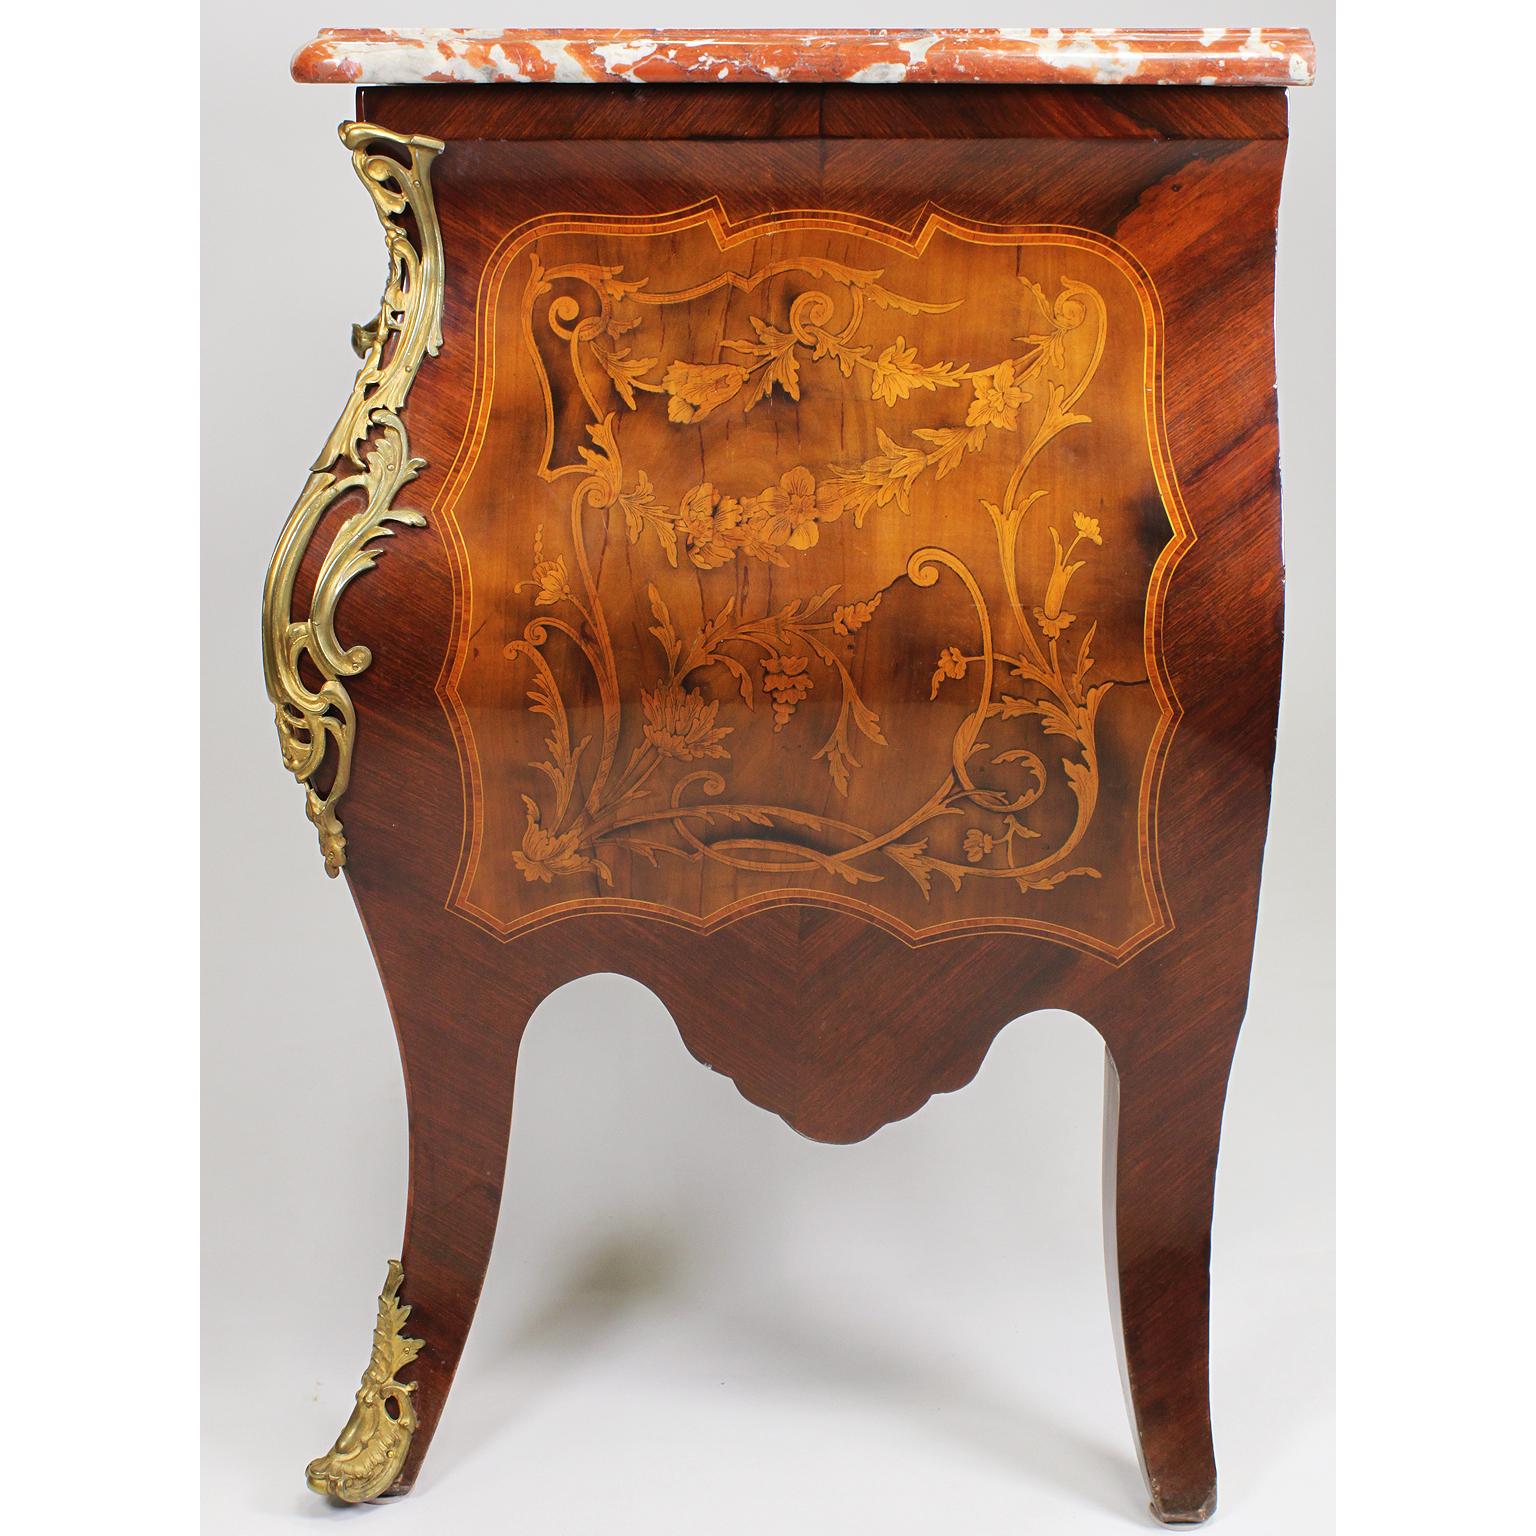 Fine French Louis XV Style Gilt-Bronze & Marquetry Chinoiserie Marquetry Commode For Sale 1